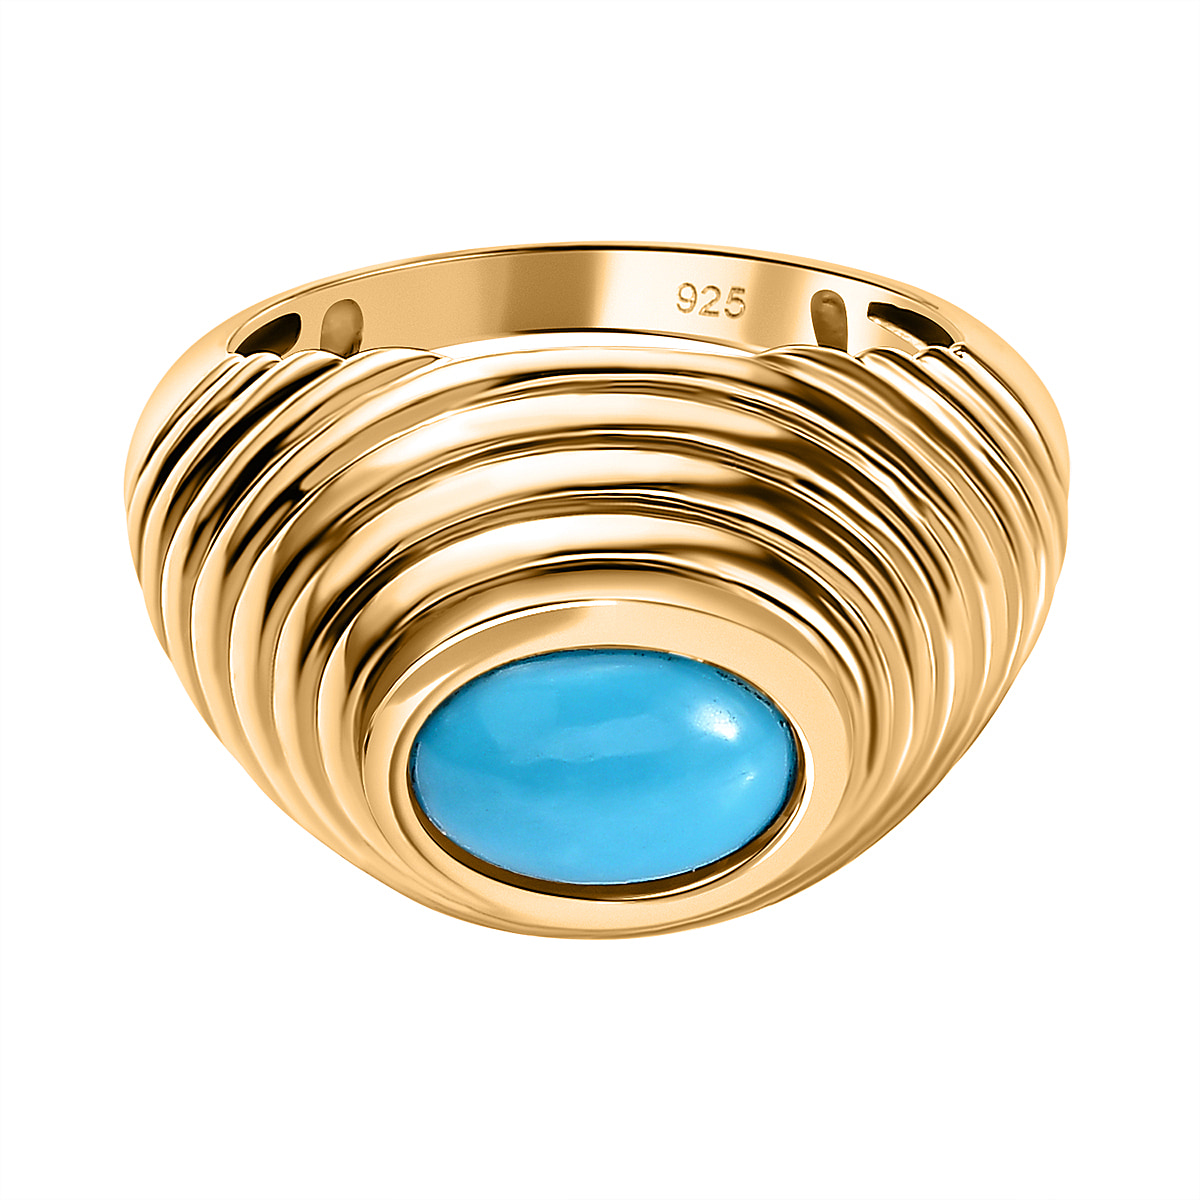 Arizona Sleeping Beauty Turquoise Solitaire Ring in 18K Yellow Gold Vermeil Plated Sterling Silver 1.67 Ct.